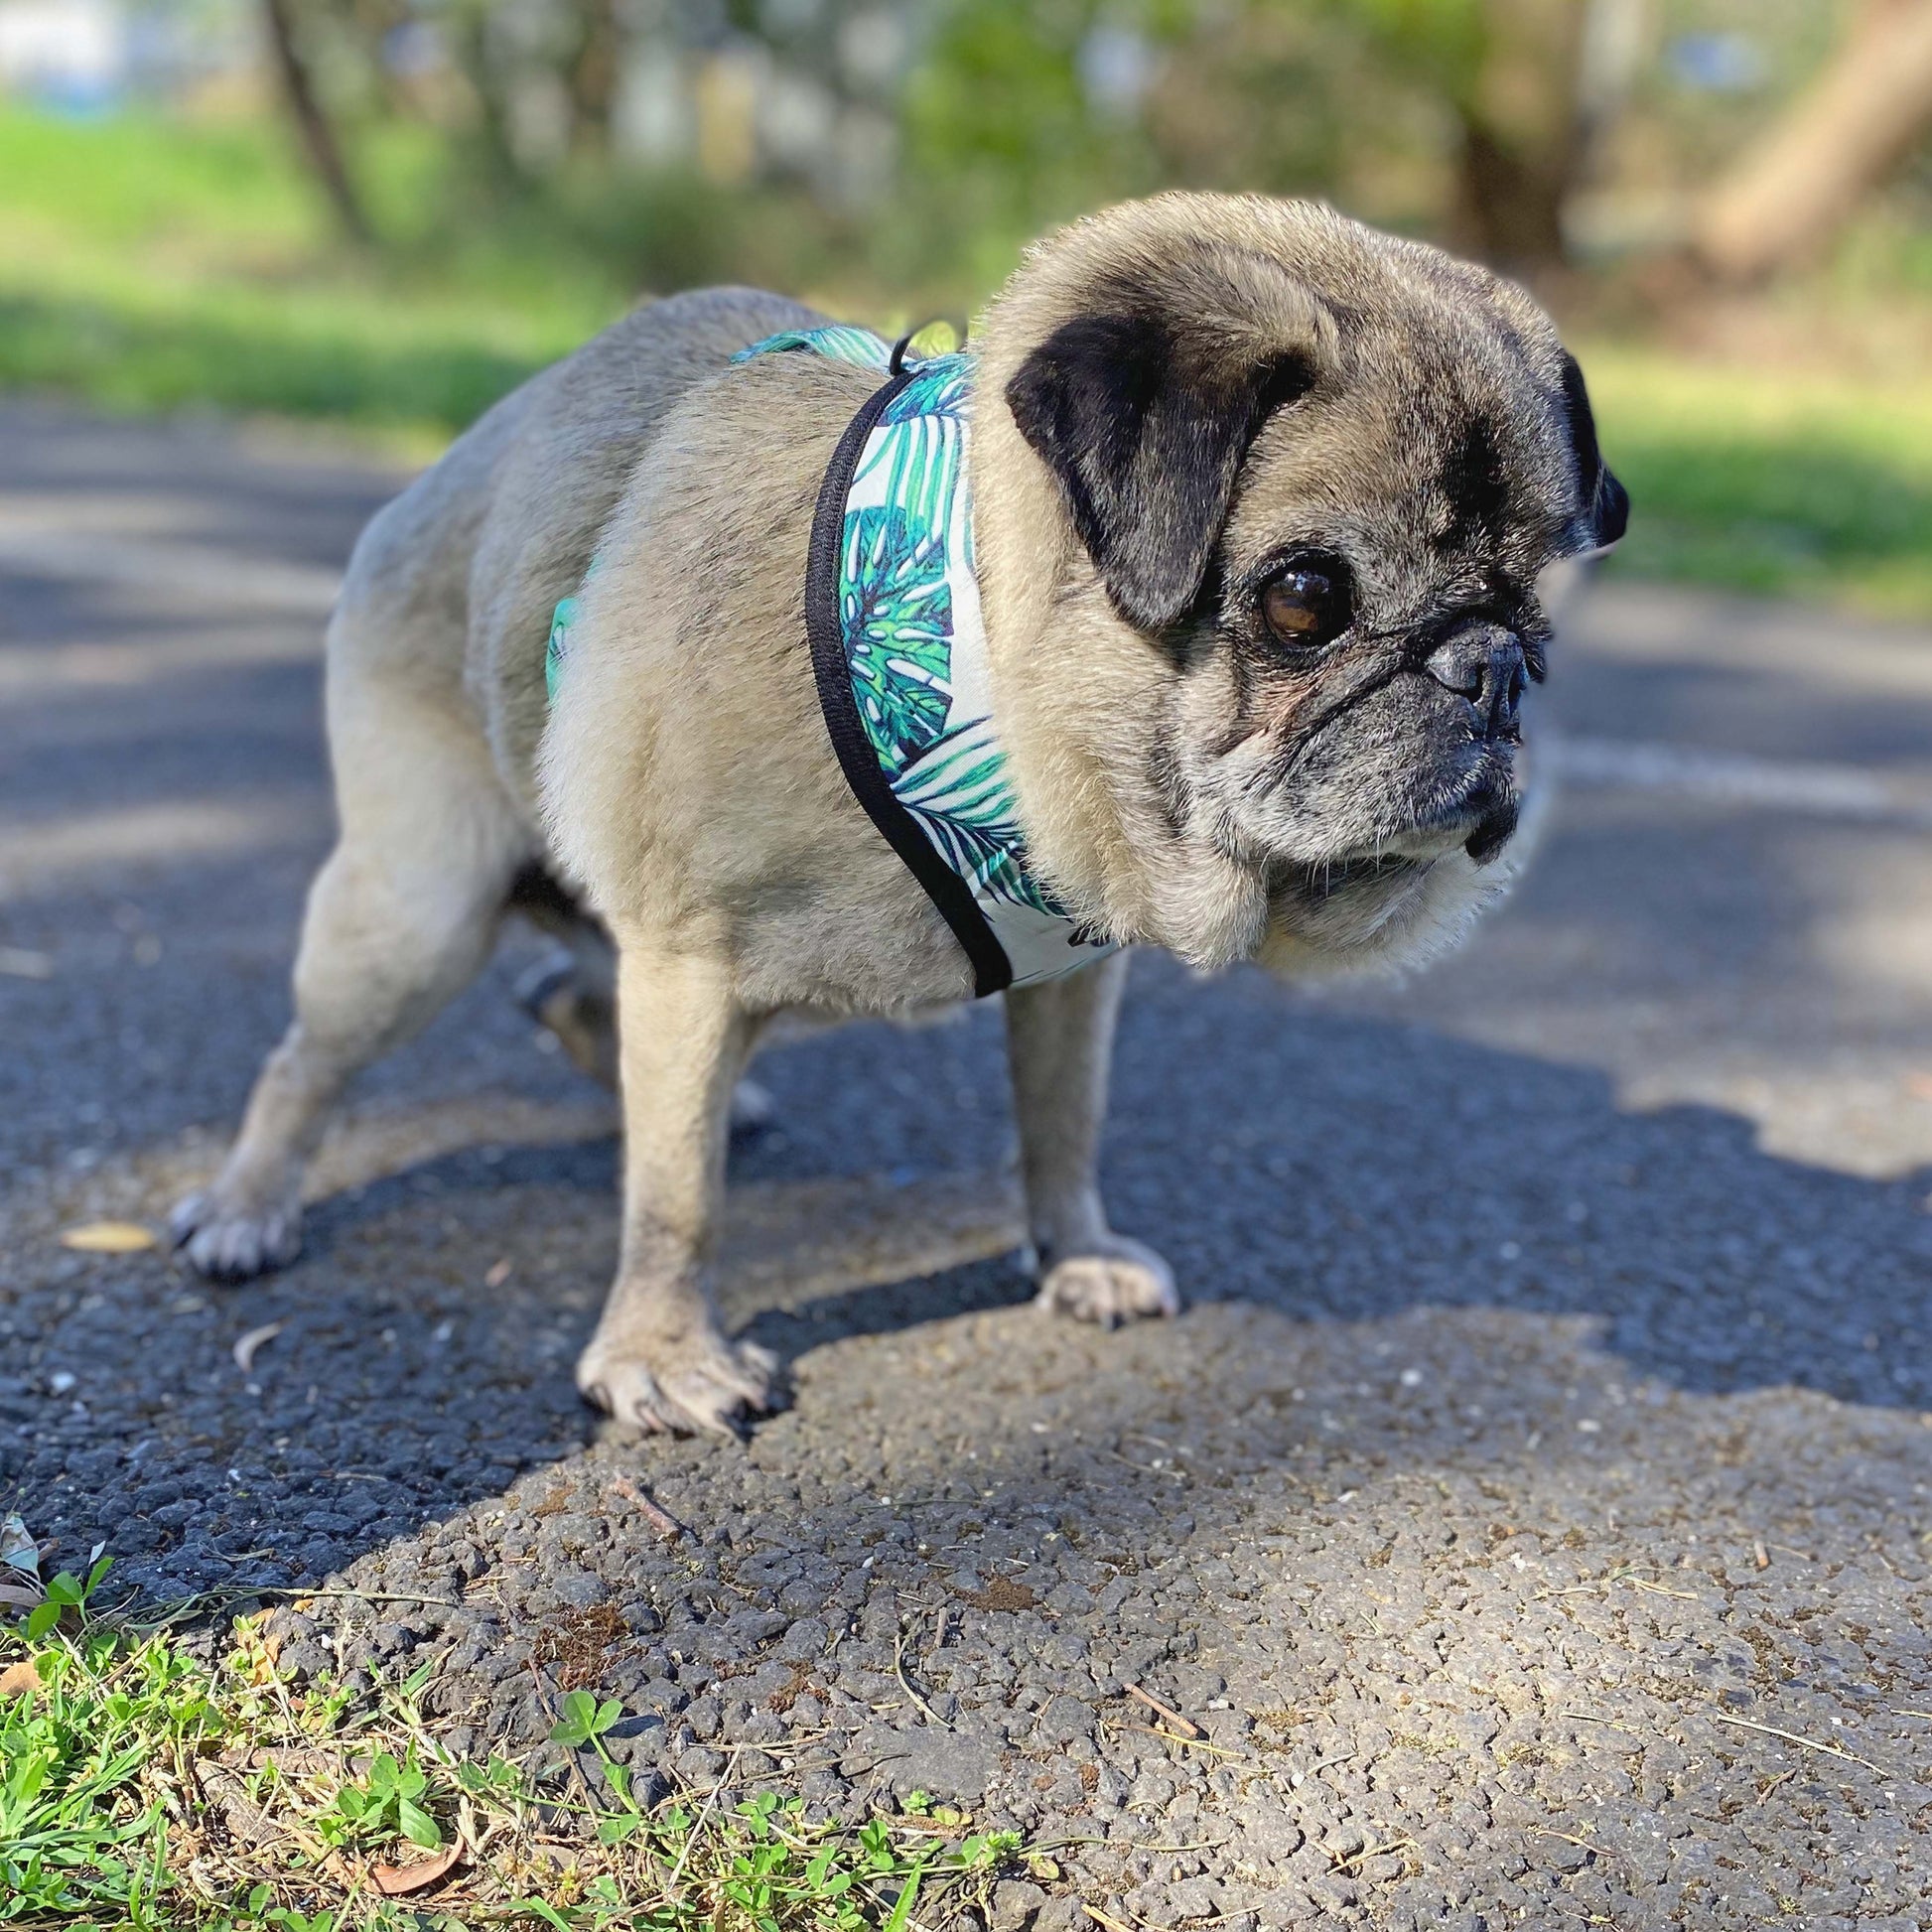 A fawn male pug wearing a palm tree leaf print motif on a pale green background polyester harness and lead with sturdy plastic rings, clips and lead fastener, a breathable mesh lining standing on a bitumen path